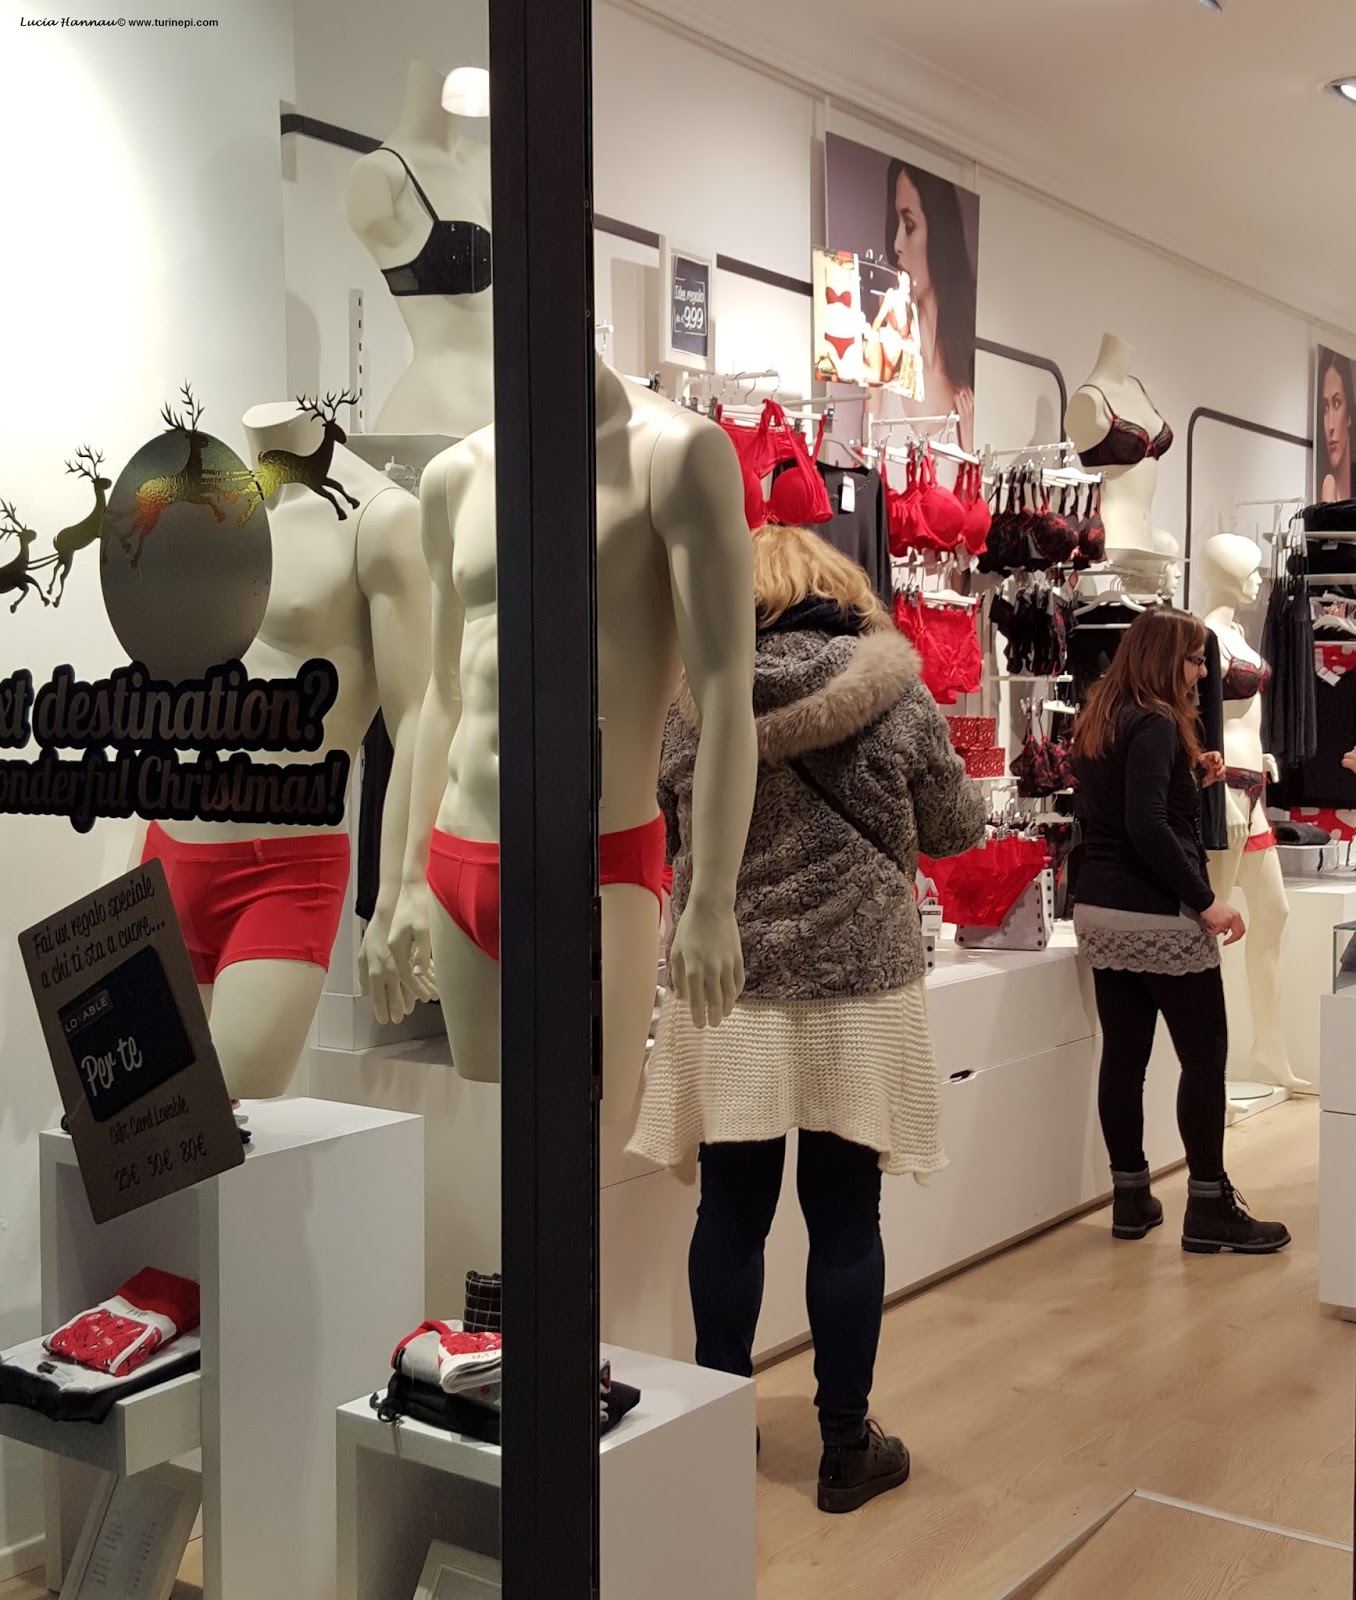 Turin Epicurean Capital: red underwear for NYE